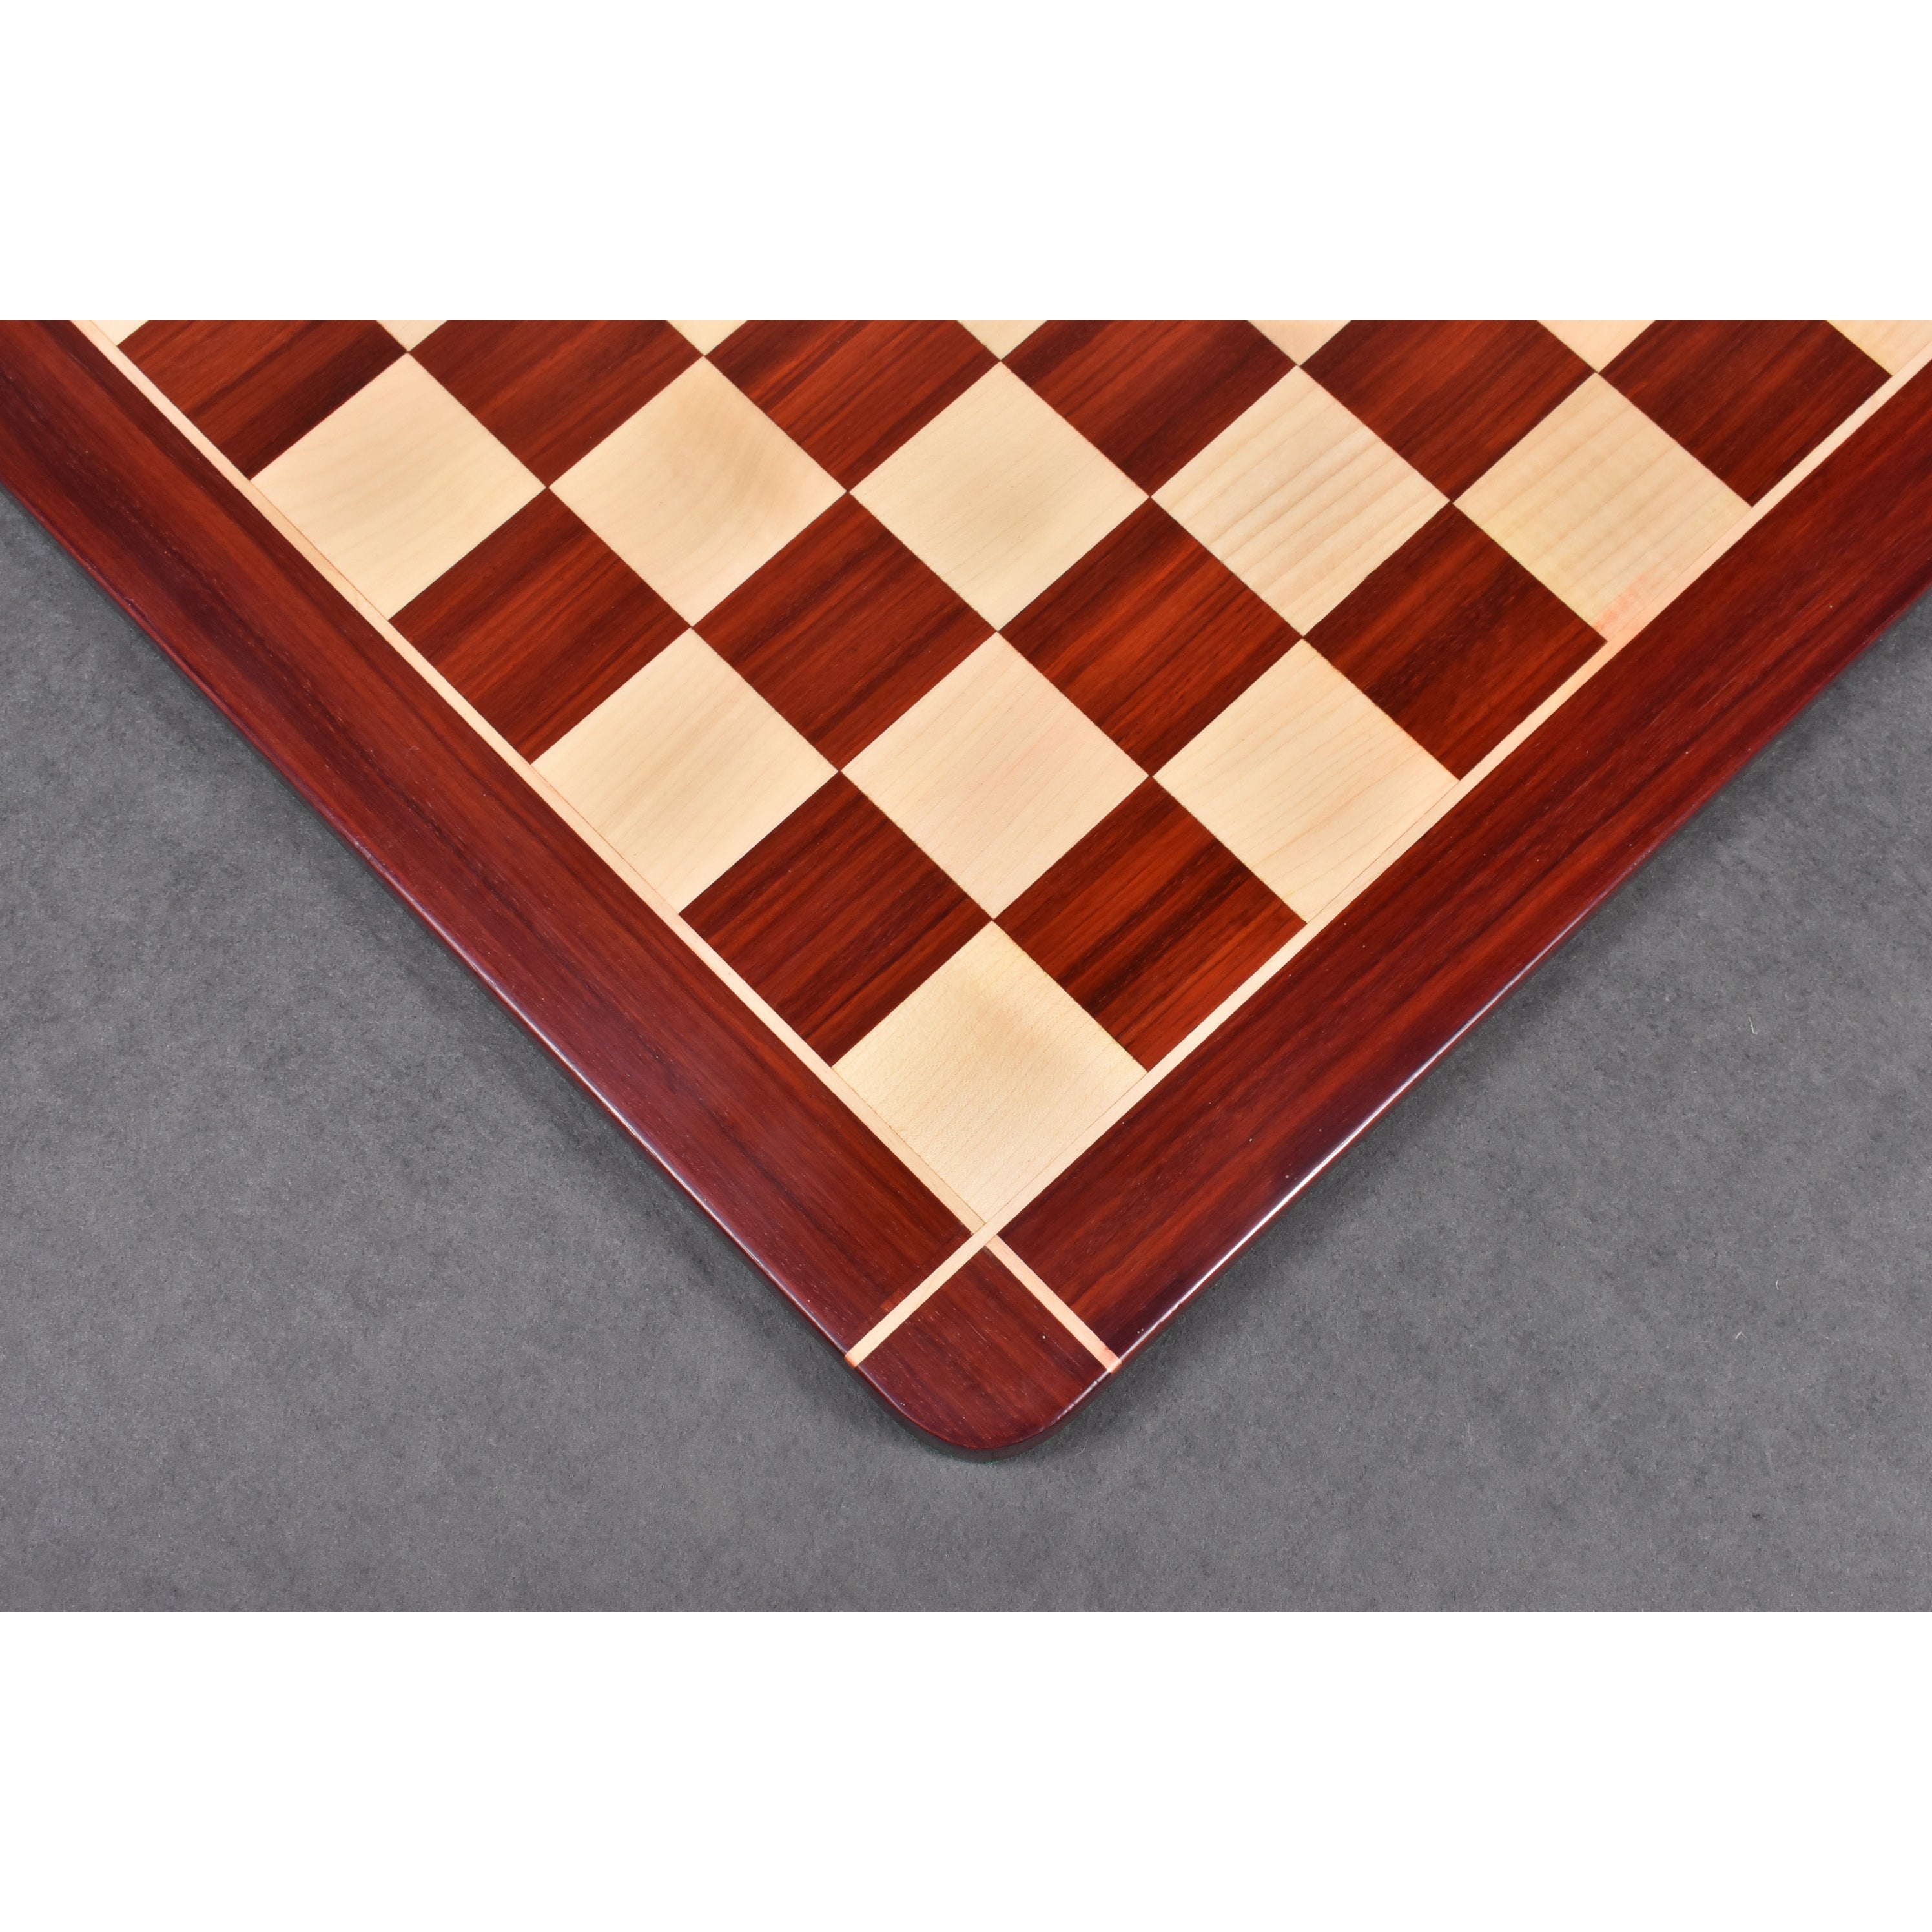 Combo of Bath Luxury Staunton Bud Rosewood Chess Pieces with 23 inches Chessboard and Storage Box